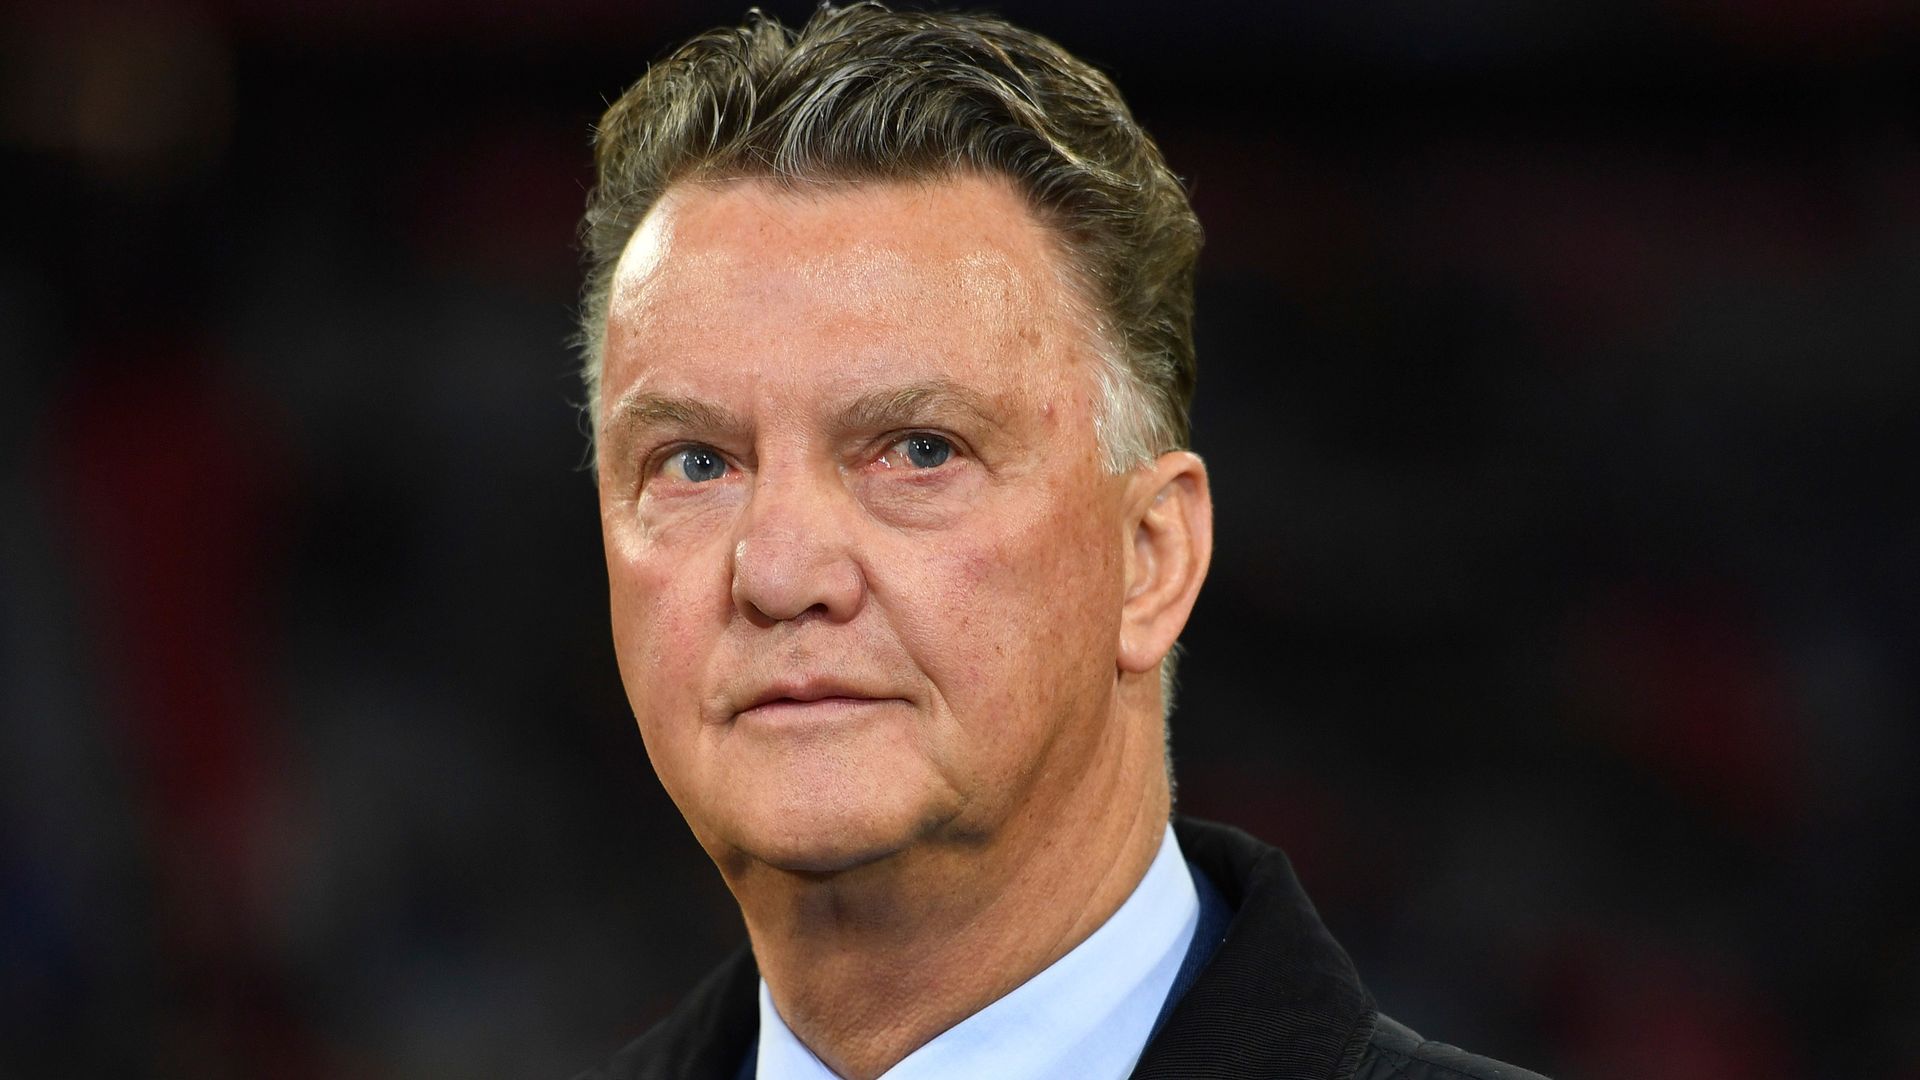 Louis van Gaal: Netherlands appoint former Manchester United boss as manager for third time |  Football News